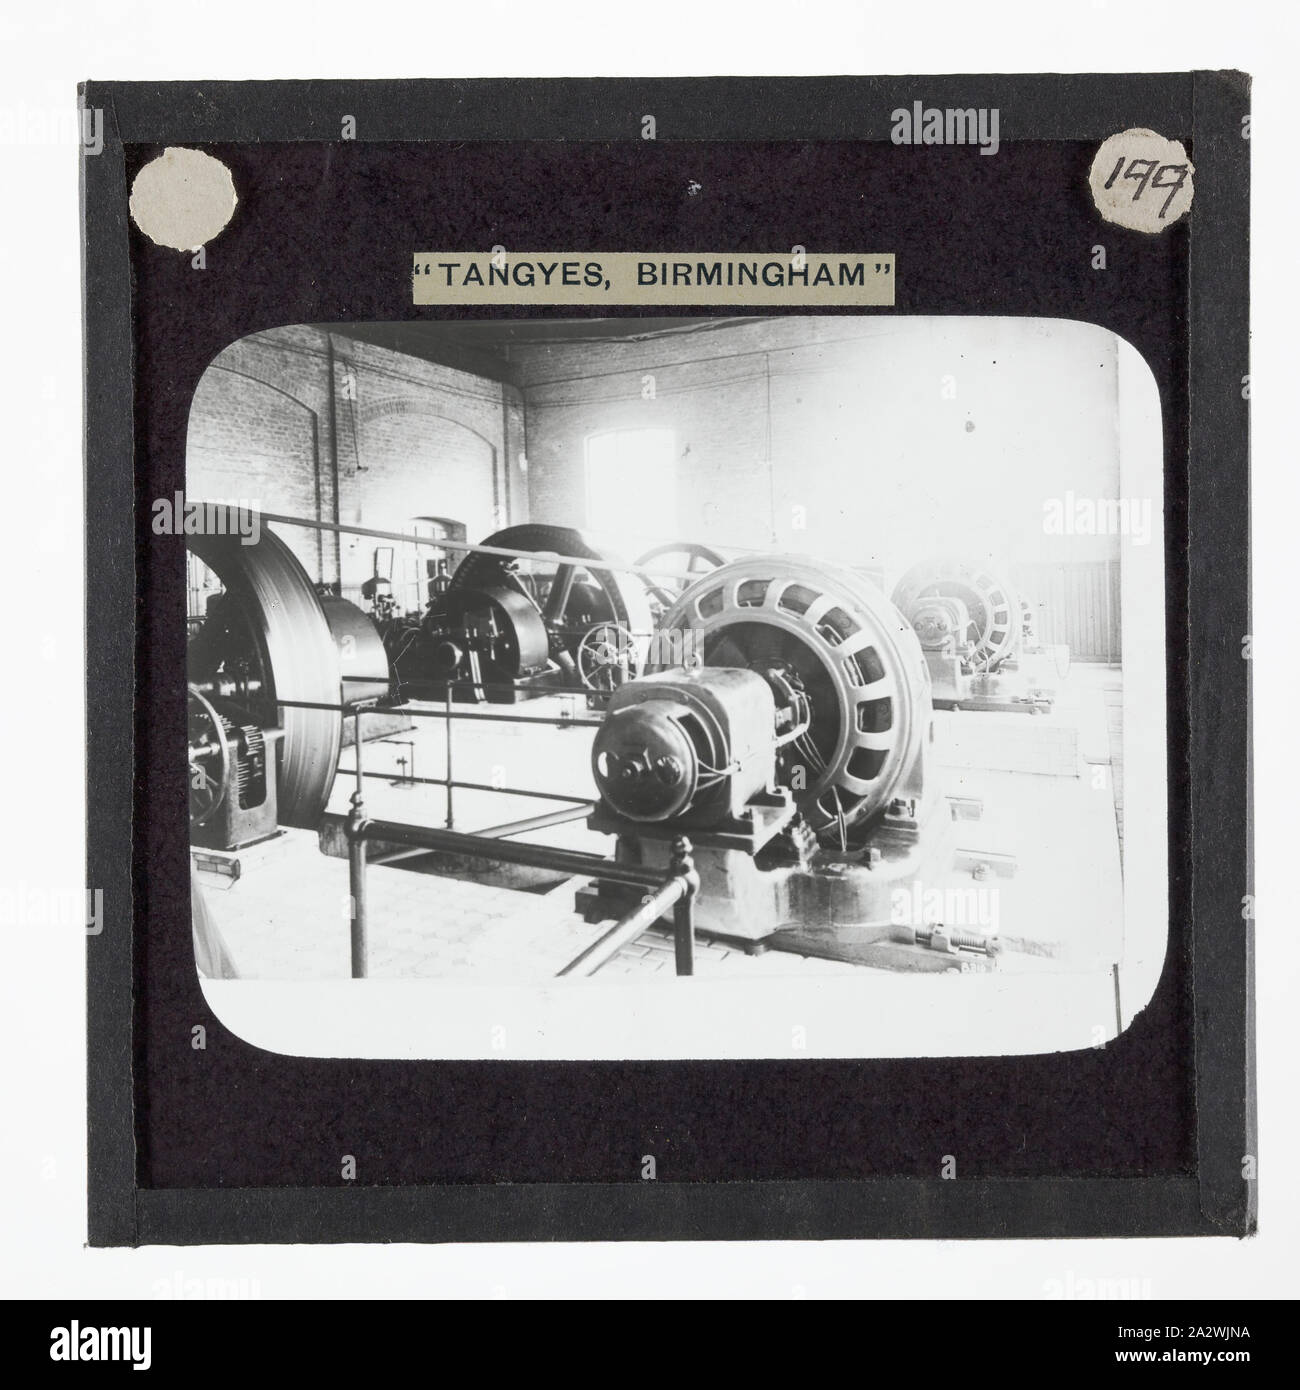 Lantern Slide - Tangyes Ltd, Electrical Generators, circa 1910, One of 239 glass lantern slides depicting products manufactured by Tangyes Limited engineers of Birmingham, England. The images include various products such as engines, centrifugal pumps, hydraulic pumps, gas producers, materials testing machines, presses, machine tools, hydraulic jacks etc. Tangyes was a company which operated from 1857 to 1957. They produced a wide variety of engineering Stock Photo